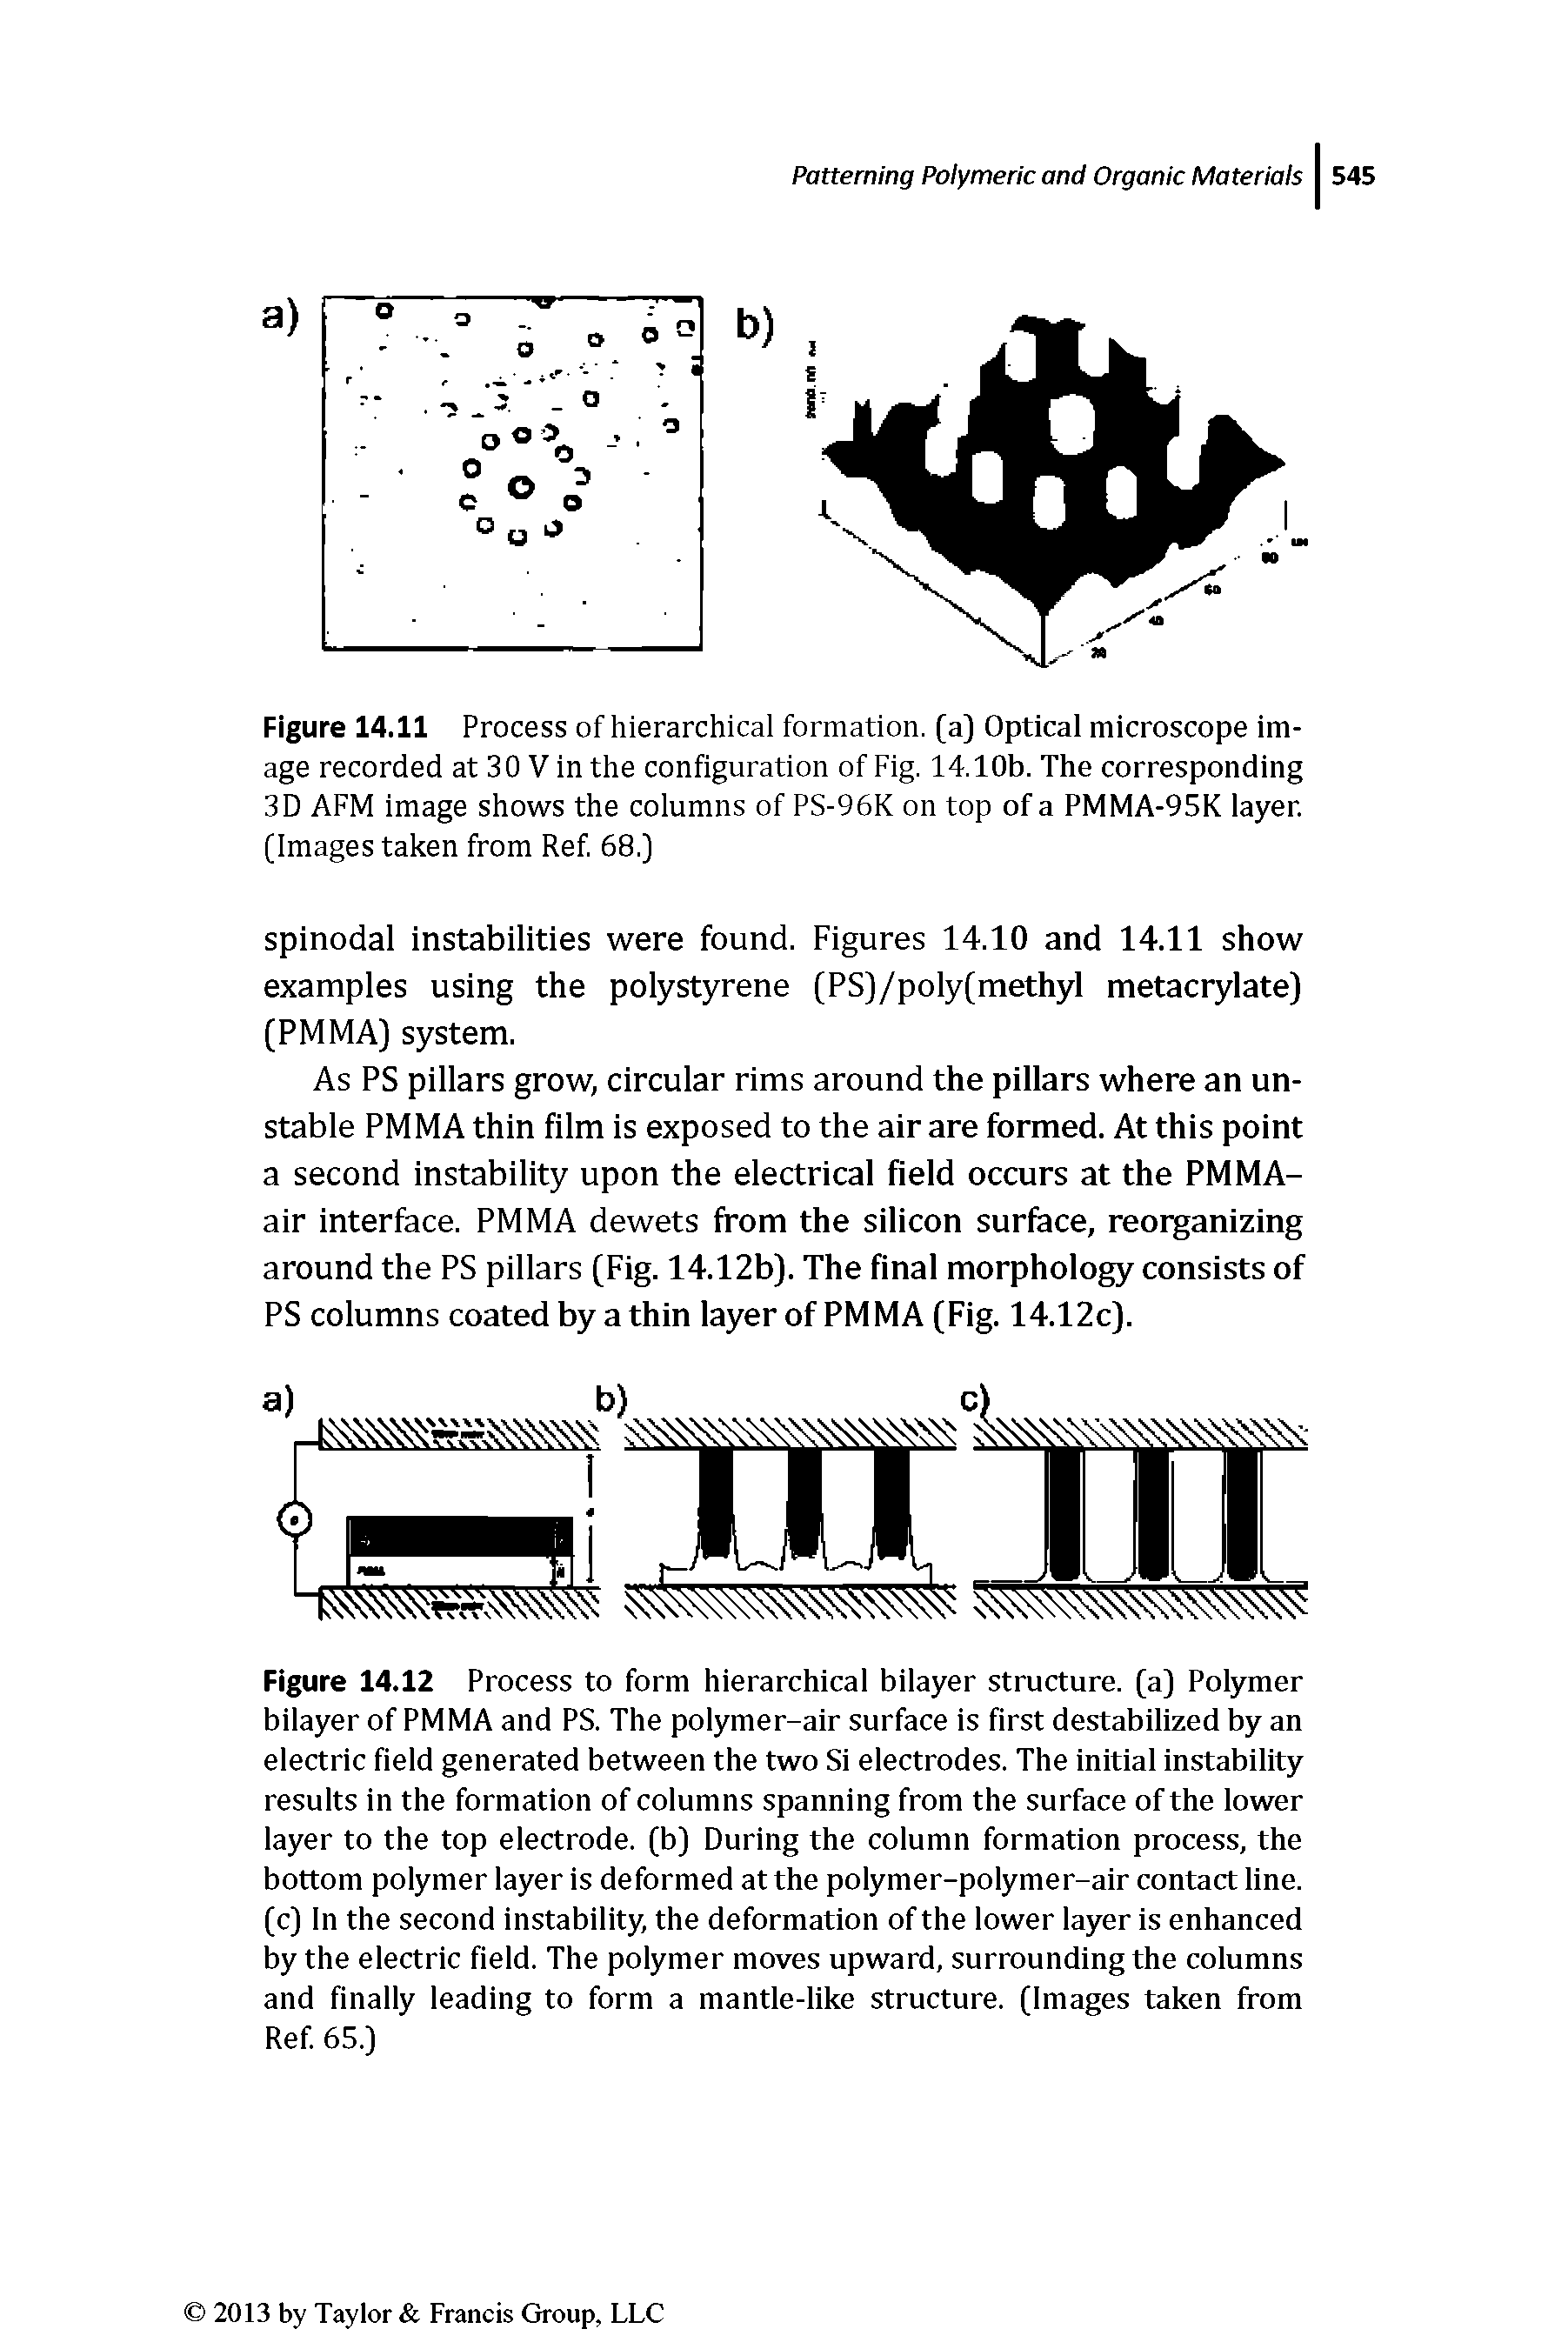 Figure 14.12 Process to form hierarchical bilayer structure, (a) Polymer bilayer of PMMA and PS. The polymer-air surface is first destabilized by an electric field generated between the two Si electrodes. The initial instability results in the formation of columns spanning from the surface of the lower layer to the top electrode, (b) During the column formation process, the bottom polymer layer is deformed at the polymer-polymer-air contact line, (c) In the second instability, the deformation of the lower layer is enhanced by the electric field. The polymer moves upward, surrounding the columns and finally leading to form a mantle-like structure. (Images taken from Ref. 65.)...